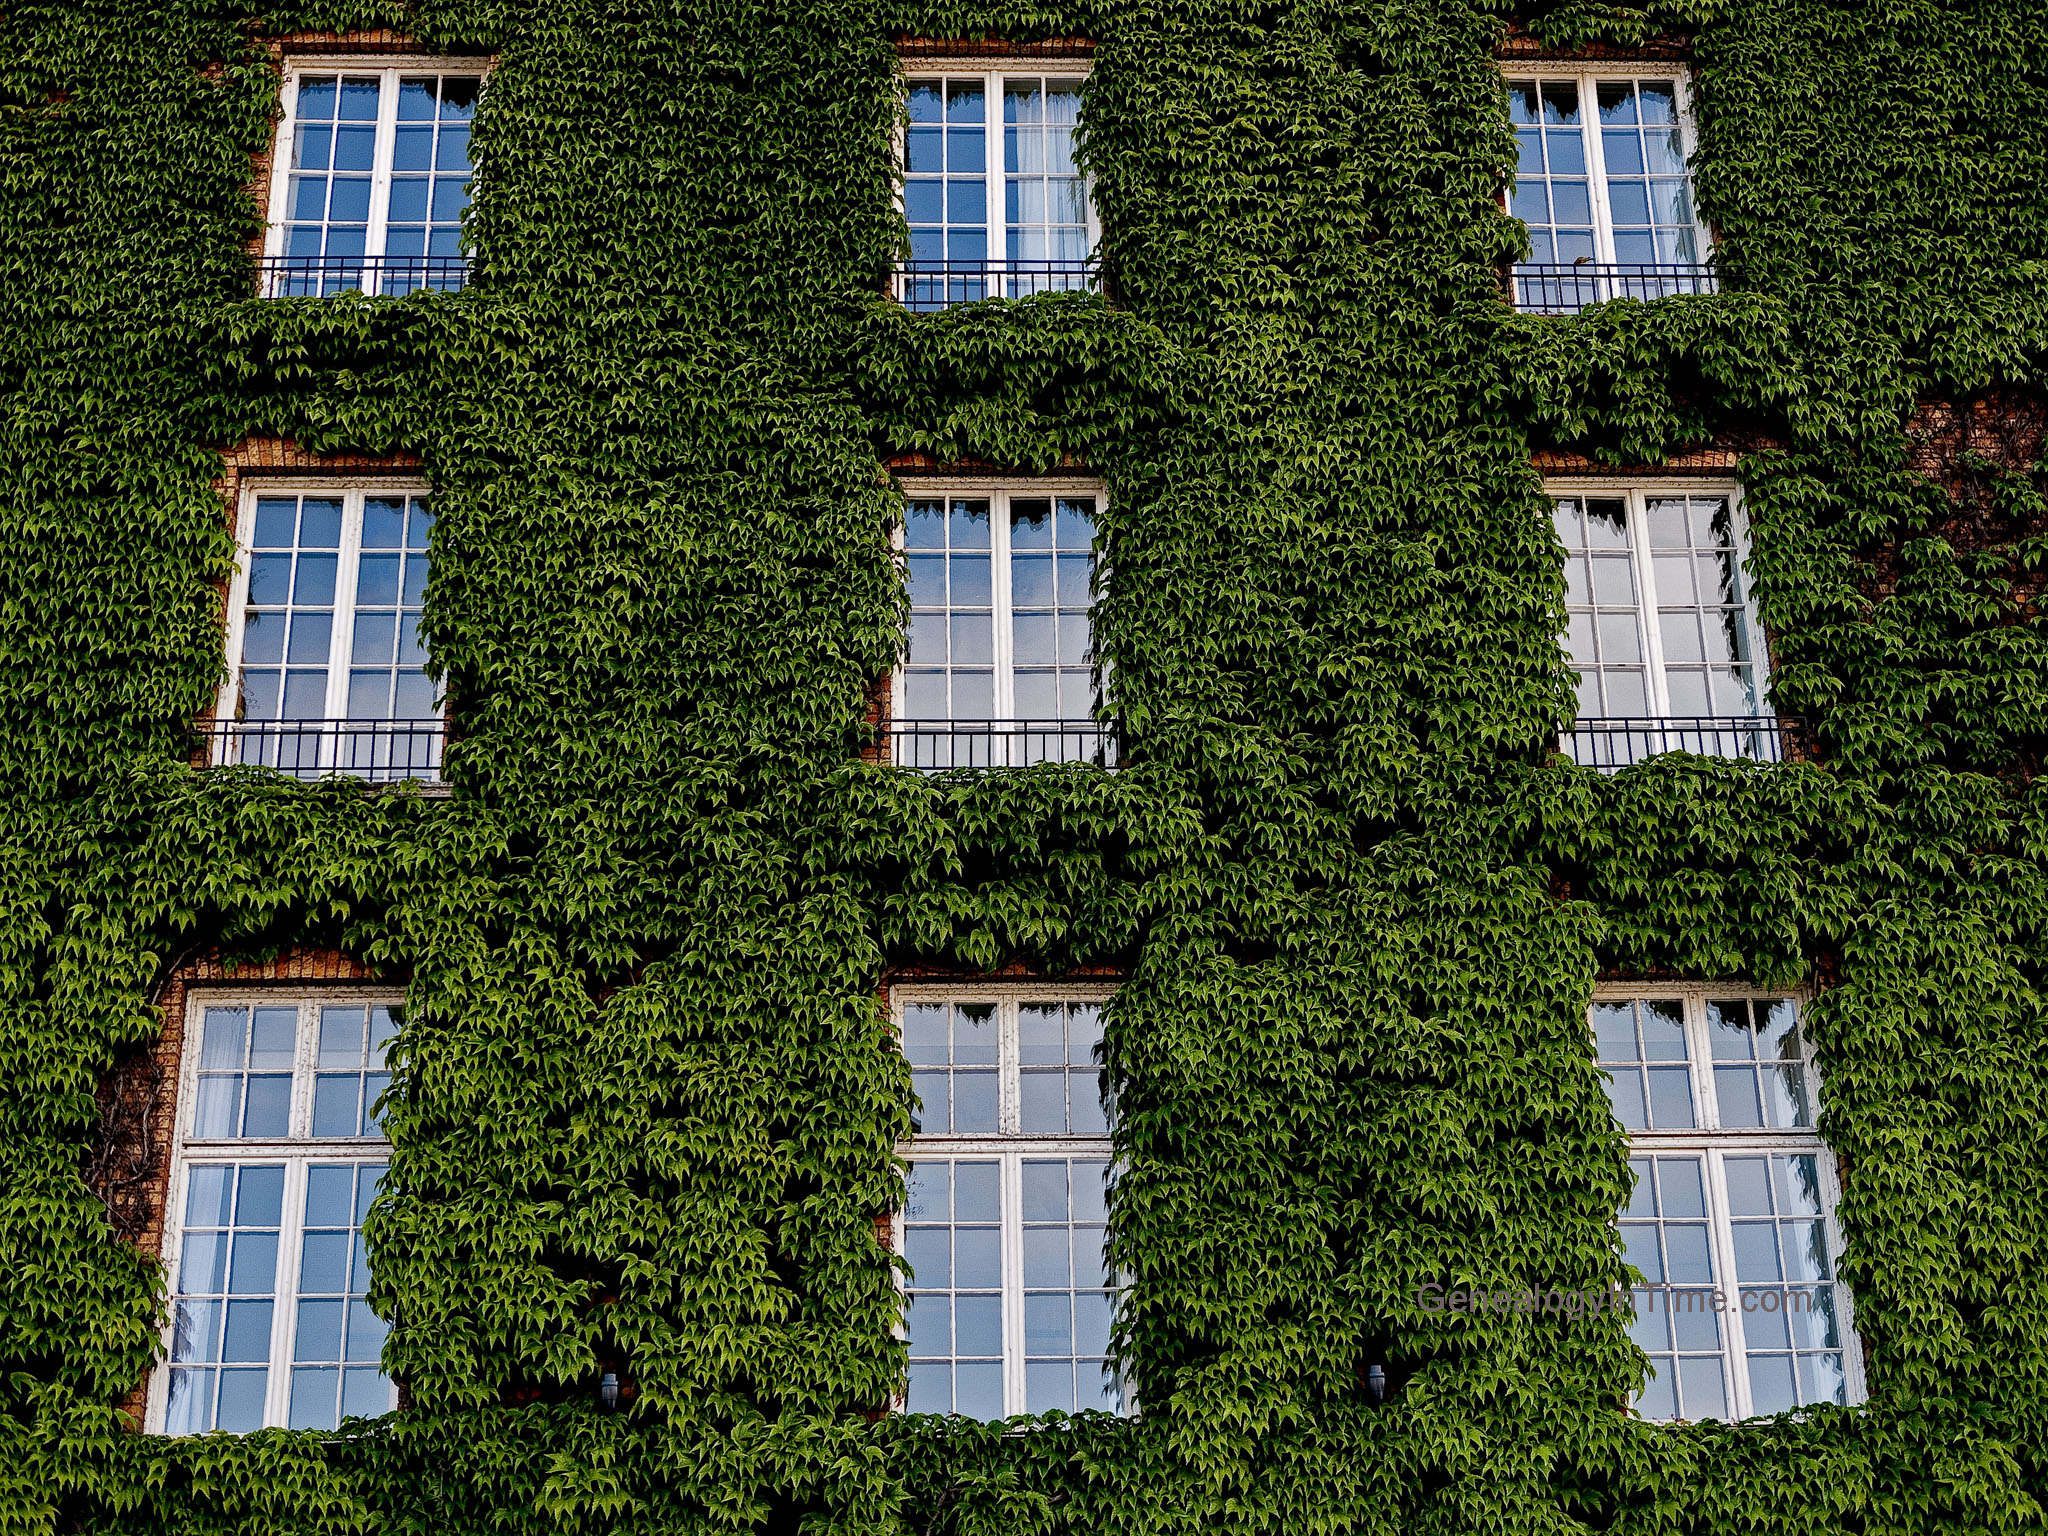 26 - ivy covered brick wall.jpg (2048×1536) | Photography/Amazing ...